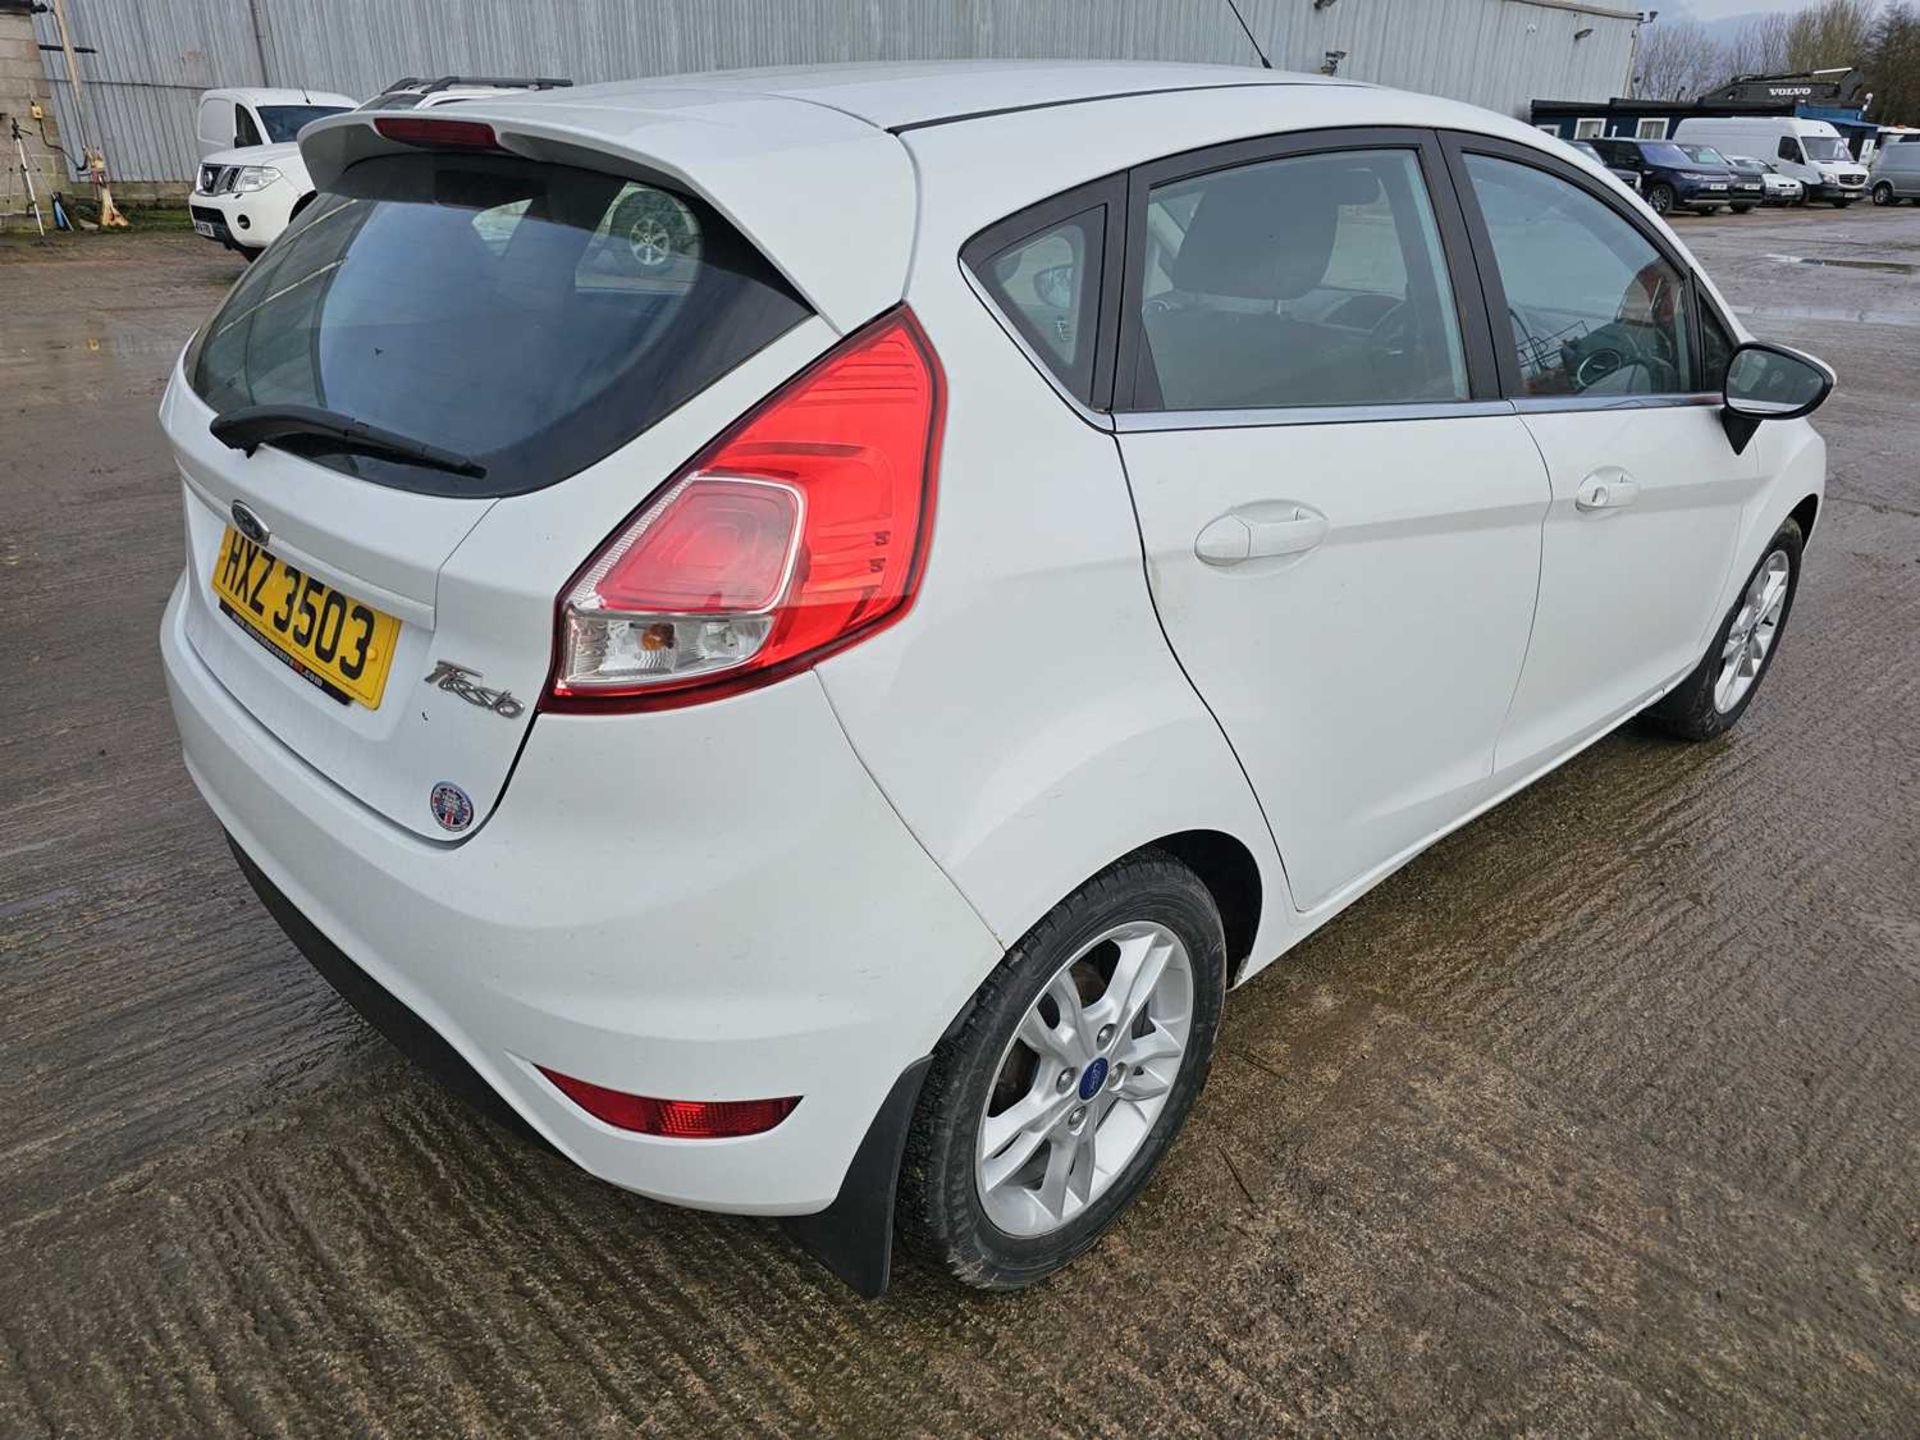 2015 Ford Fiesta, 5 Speed, Bluetooth, A/C (Reg. Docs. & Service History Available, Tested 01/25) - Image 2 of 28